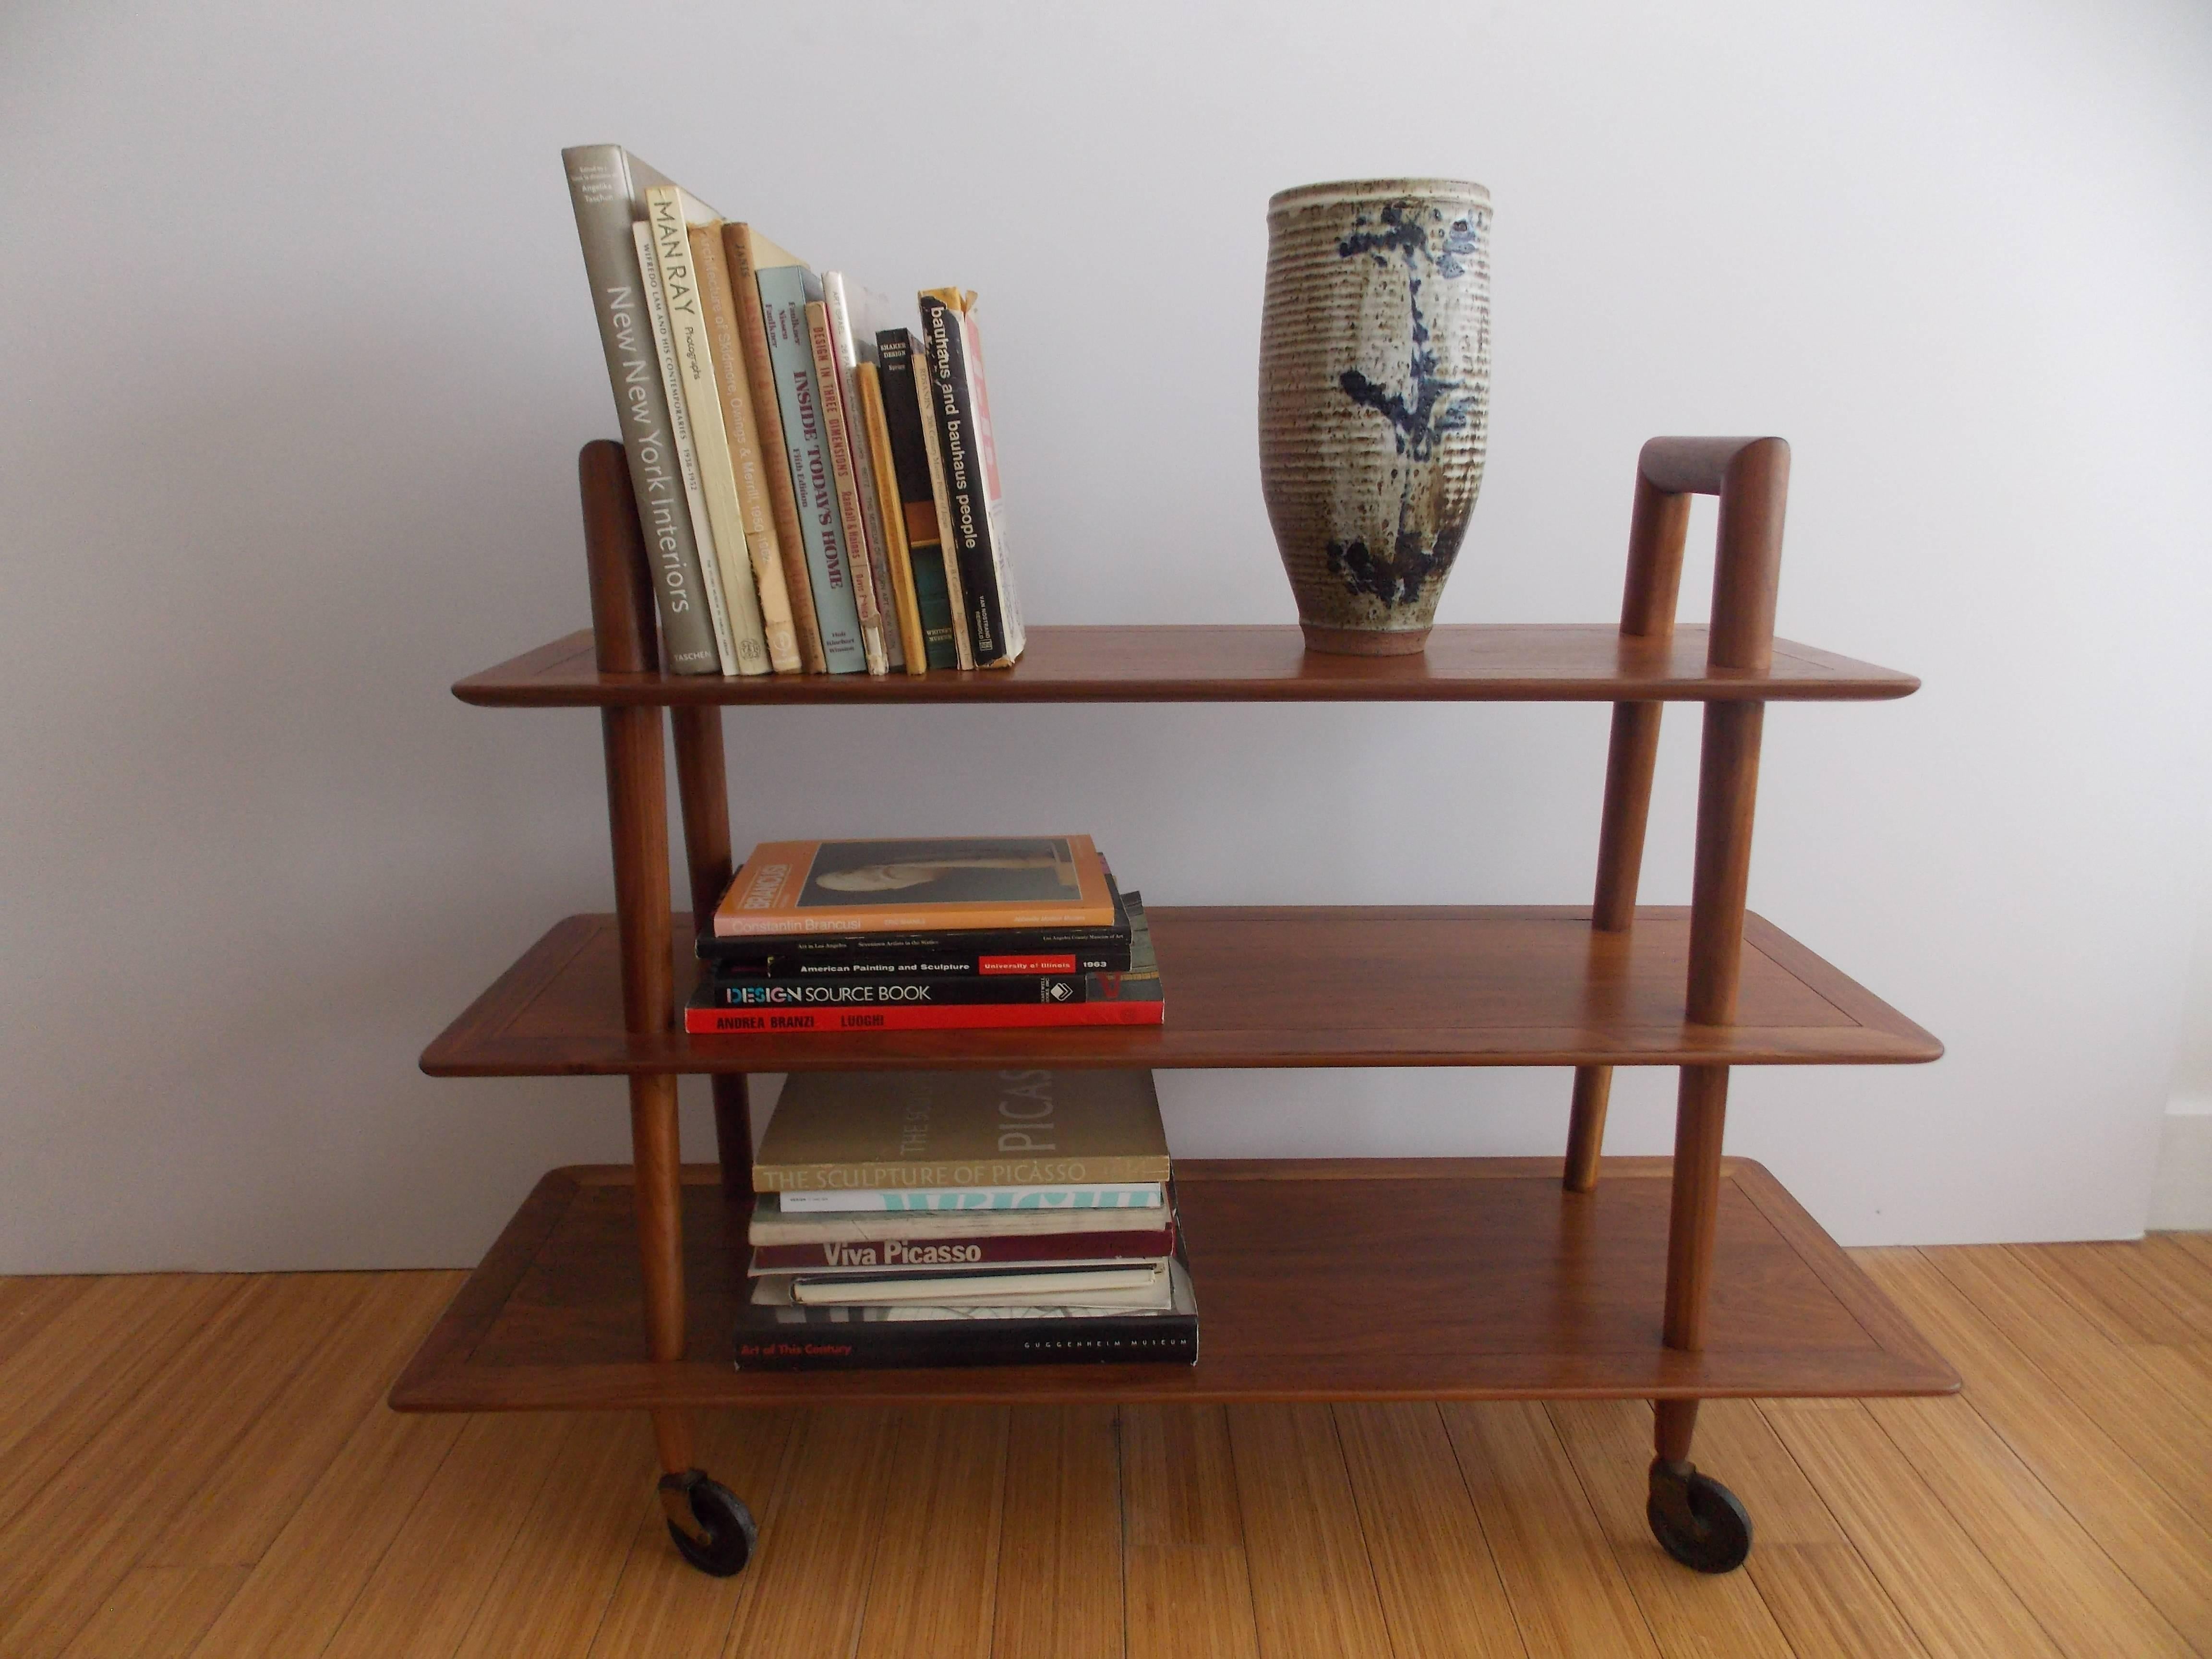 An nice modernist design.
Simple with elegant lines.
Made of walnut with hard plastic wheels.
The wood has been refinished to its natural grain.
The wheels show ware / patina.
No damage.
 